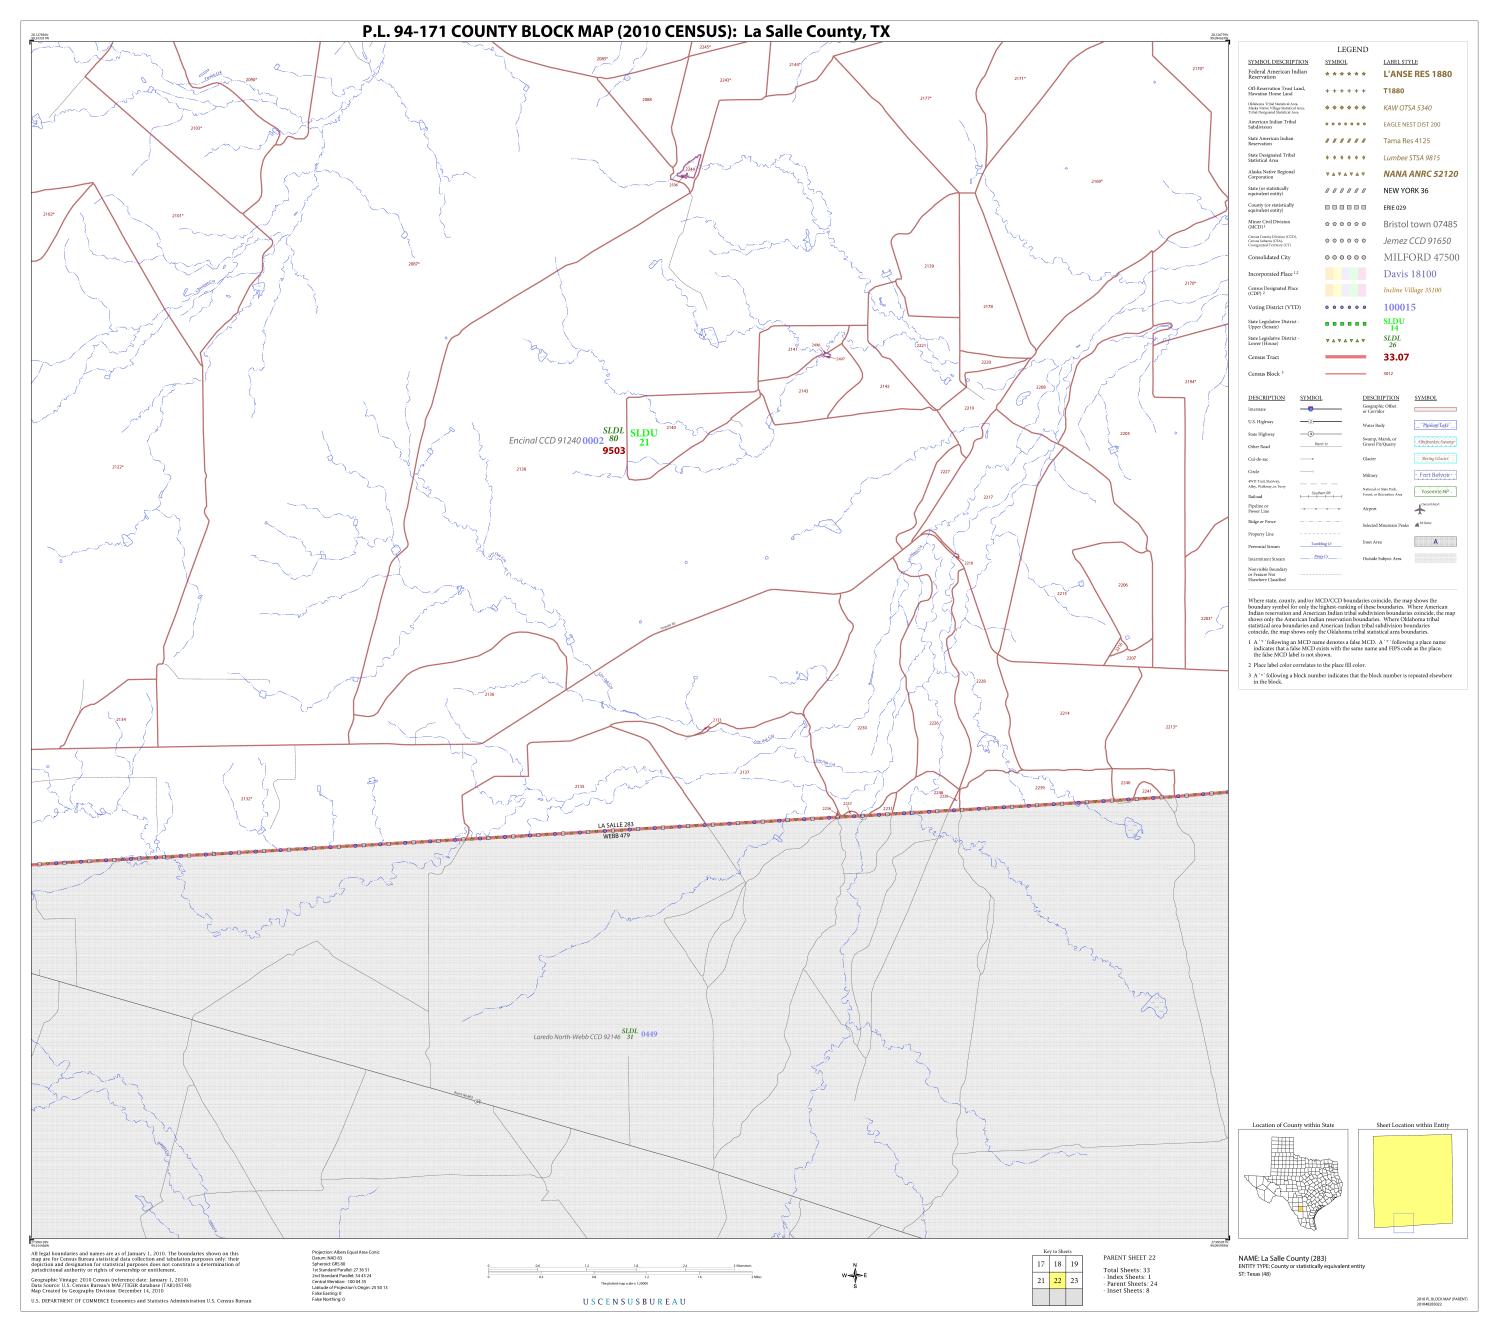 P.L. 94-171 County Block Map (2010 Census): La Salle County, Block 22
                                                
                                                    [Sequence #]: 1 of 1
                                                